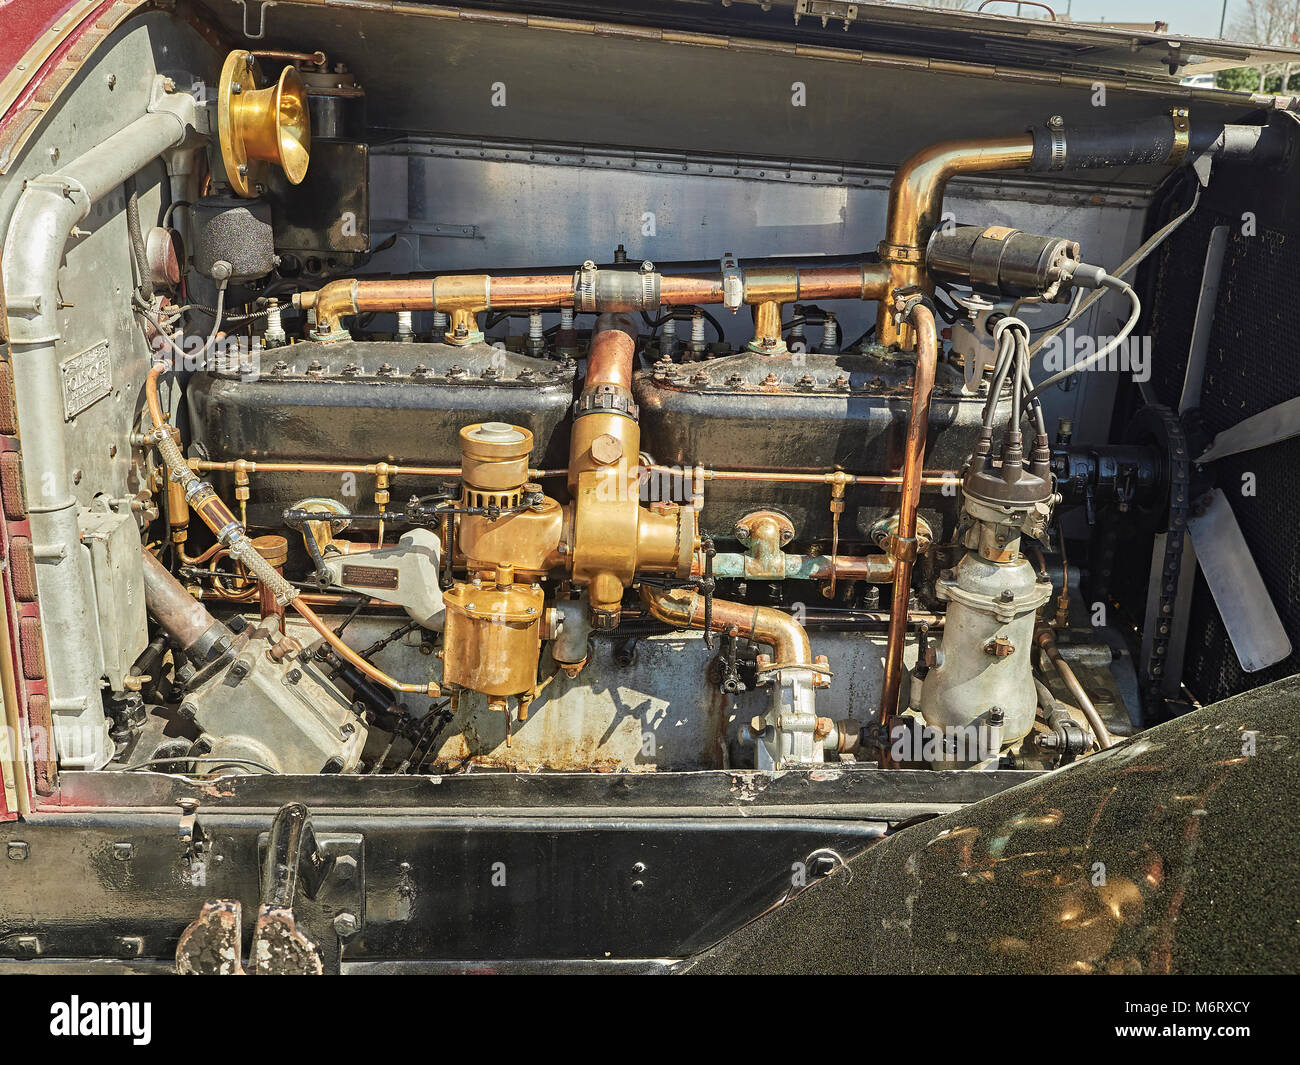 Engine compartment or motor bay of an antique 1924 Rolls Royce Silver Ghost showing the six cylinder motor of the classic vintage British motorcar. Stock Photo